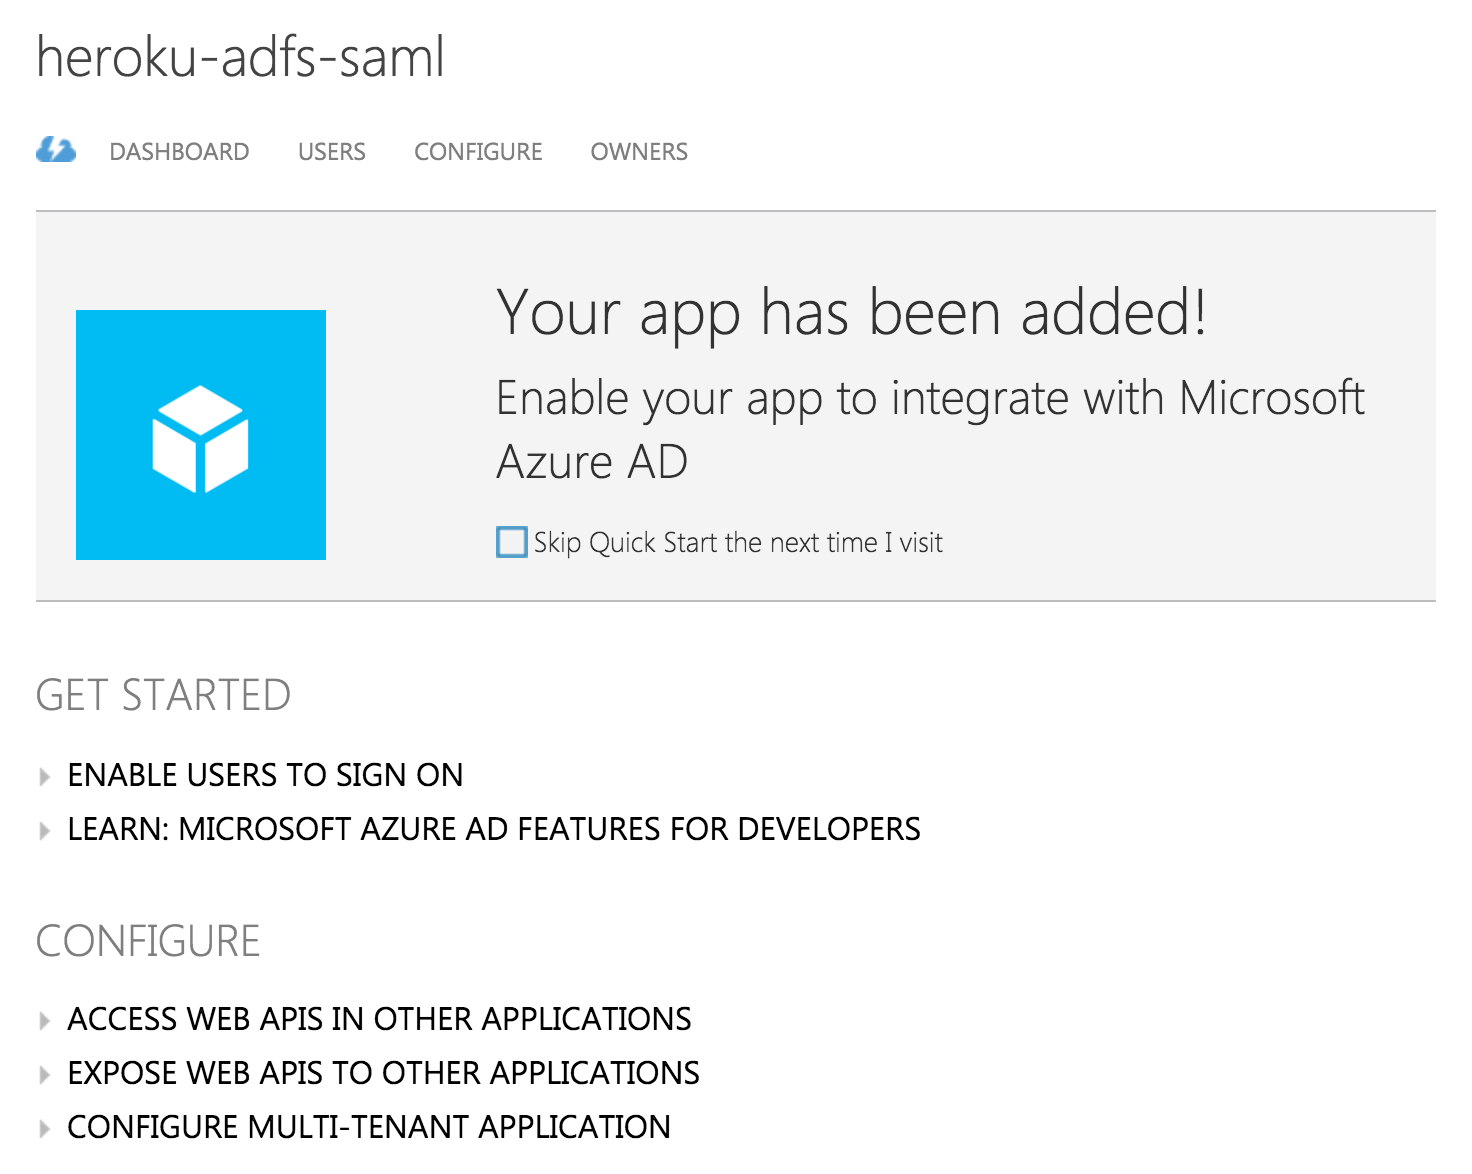 Azure App successfully added